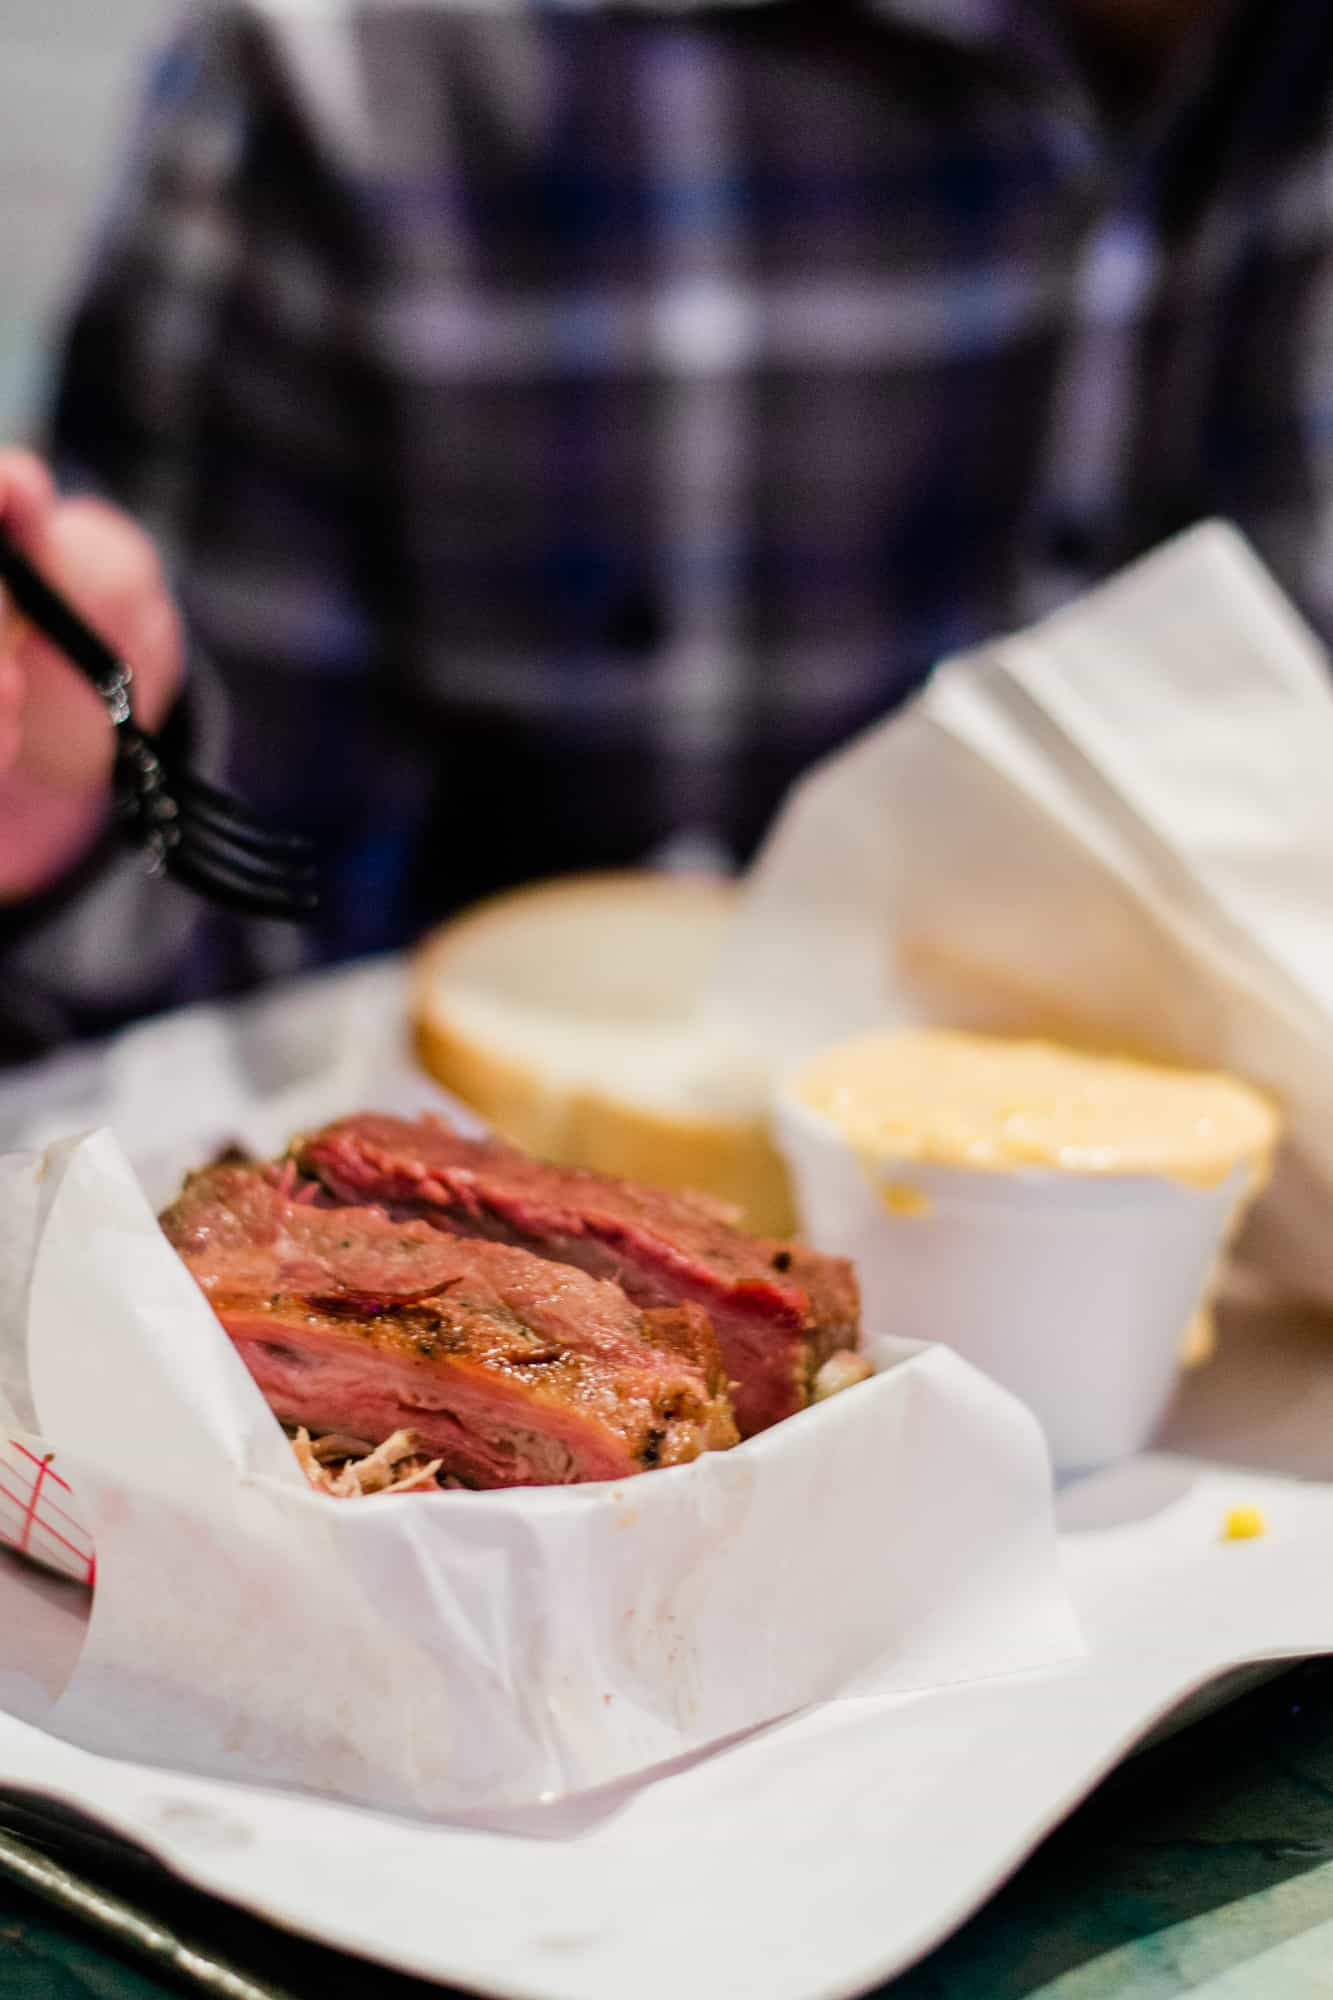 Kansas City is a mecca for barbecue fanatics. If you're visiting Kansas City, here's the top 5 Kansas City barbecue restaurants you won't want to miss.